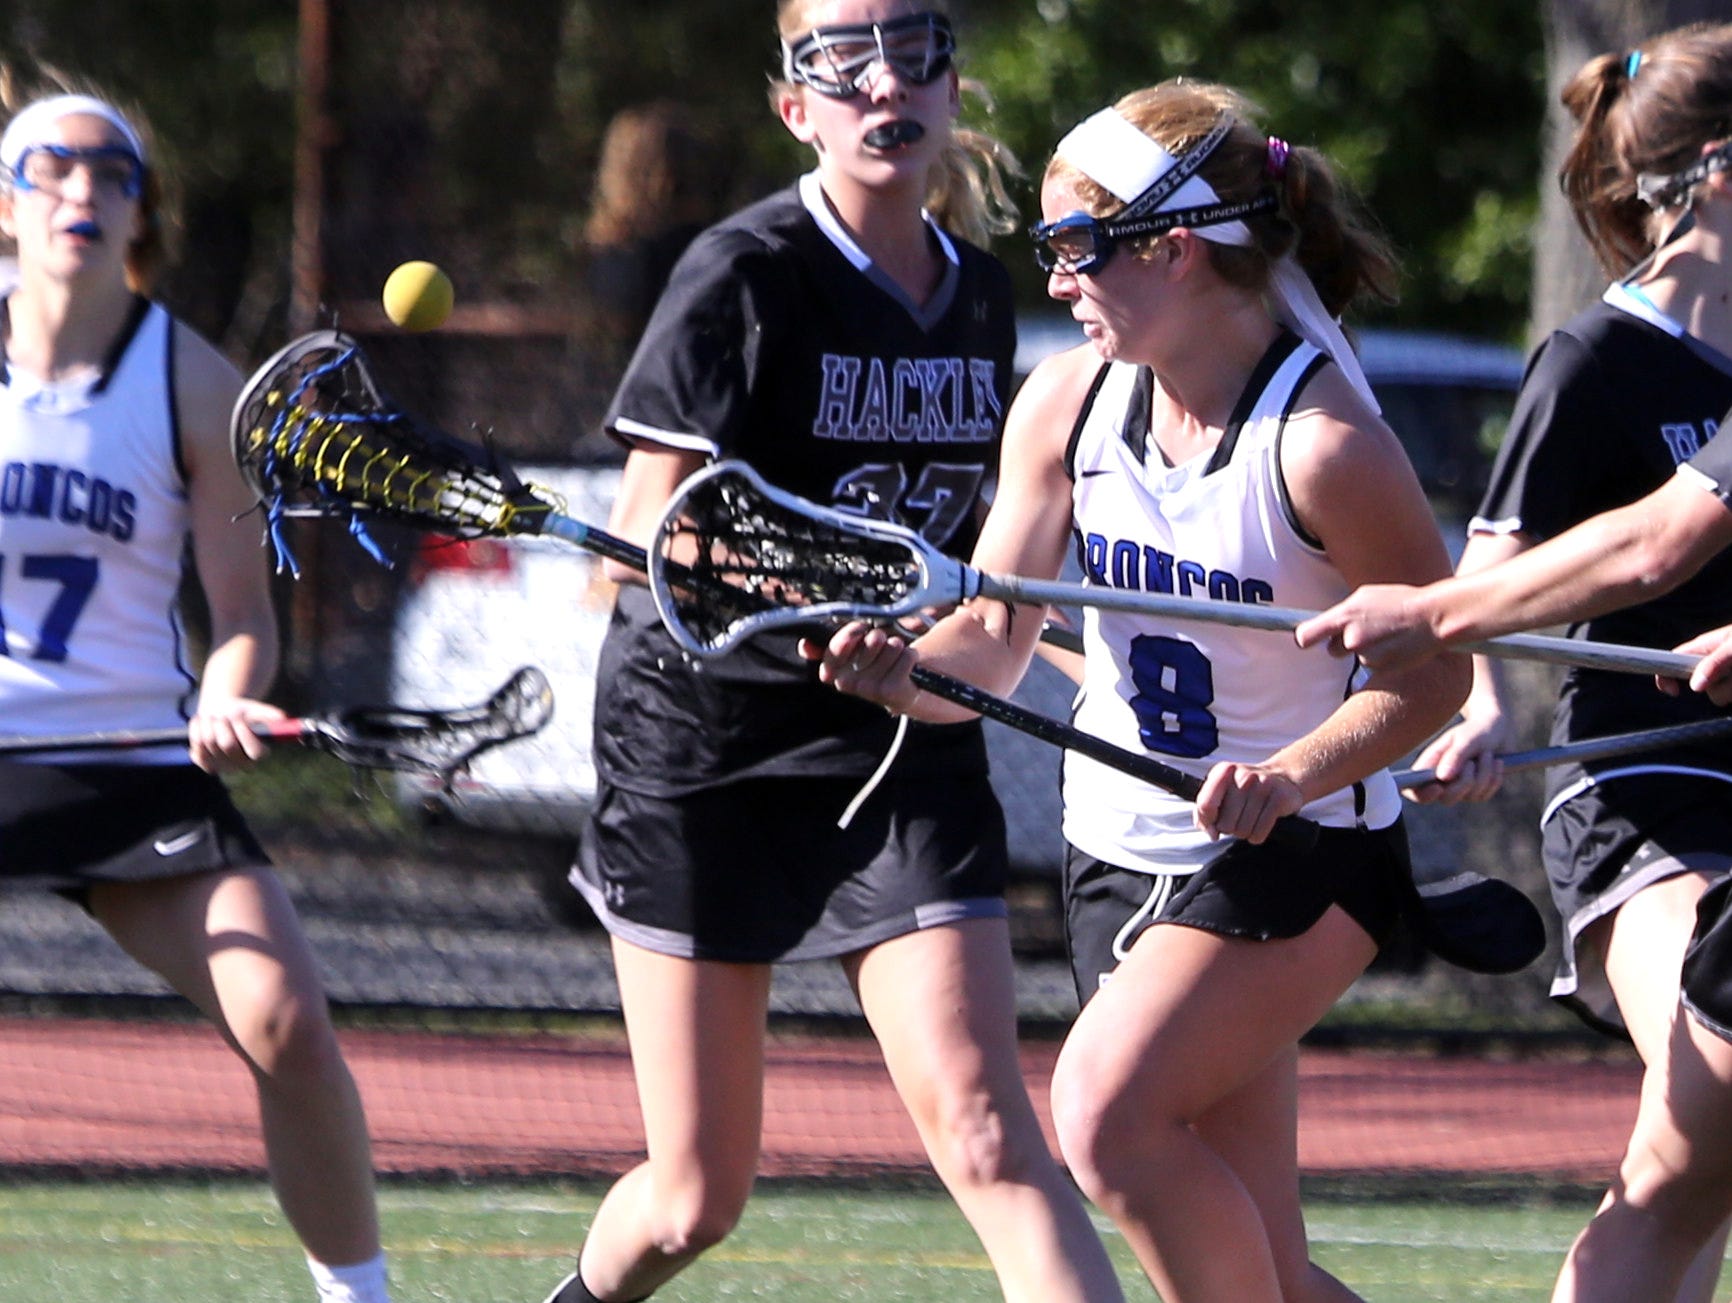 Bronxville defeated Hackley 15-11 in a varsity girls lacrosse game at Bronxville High School April 20, 2016.